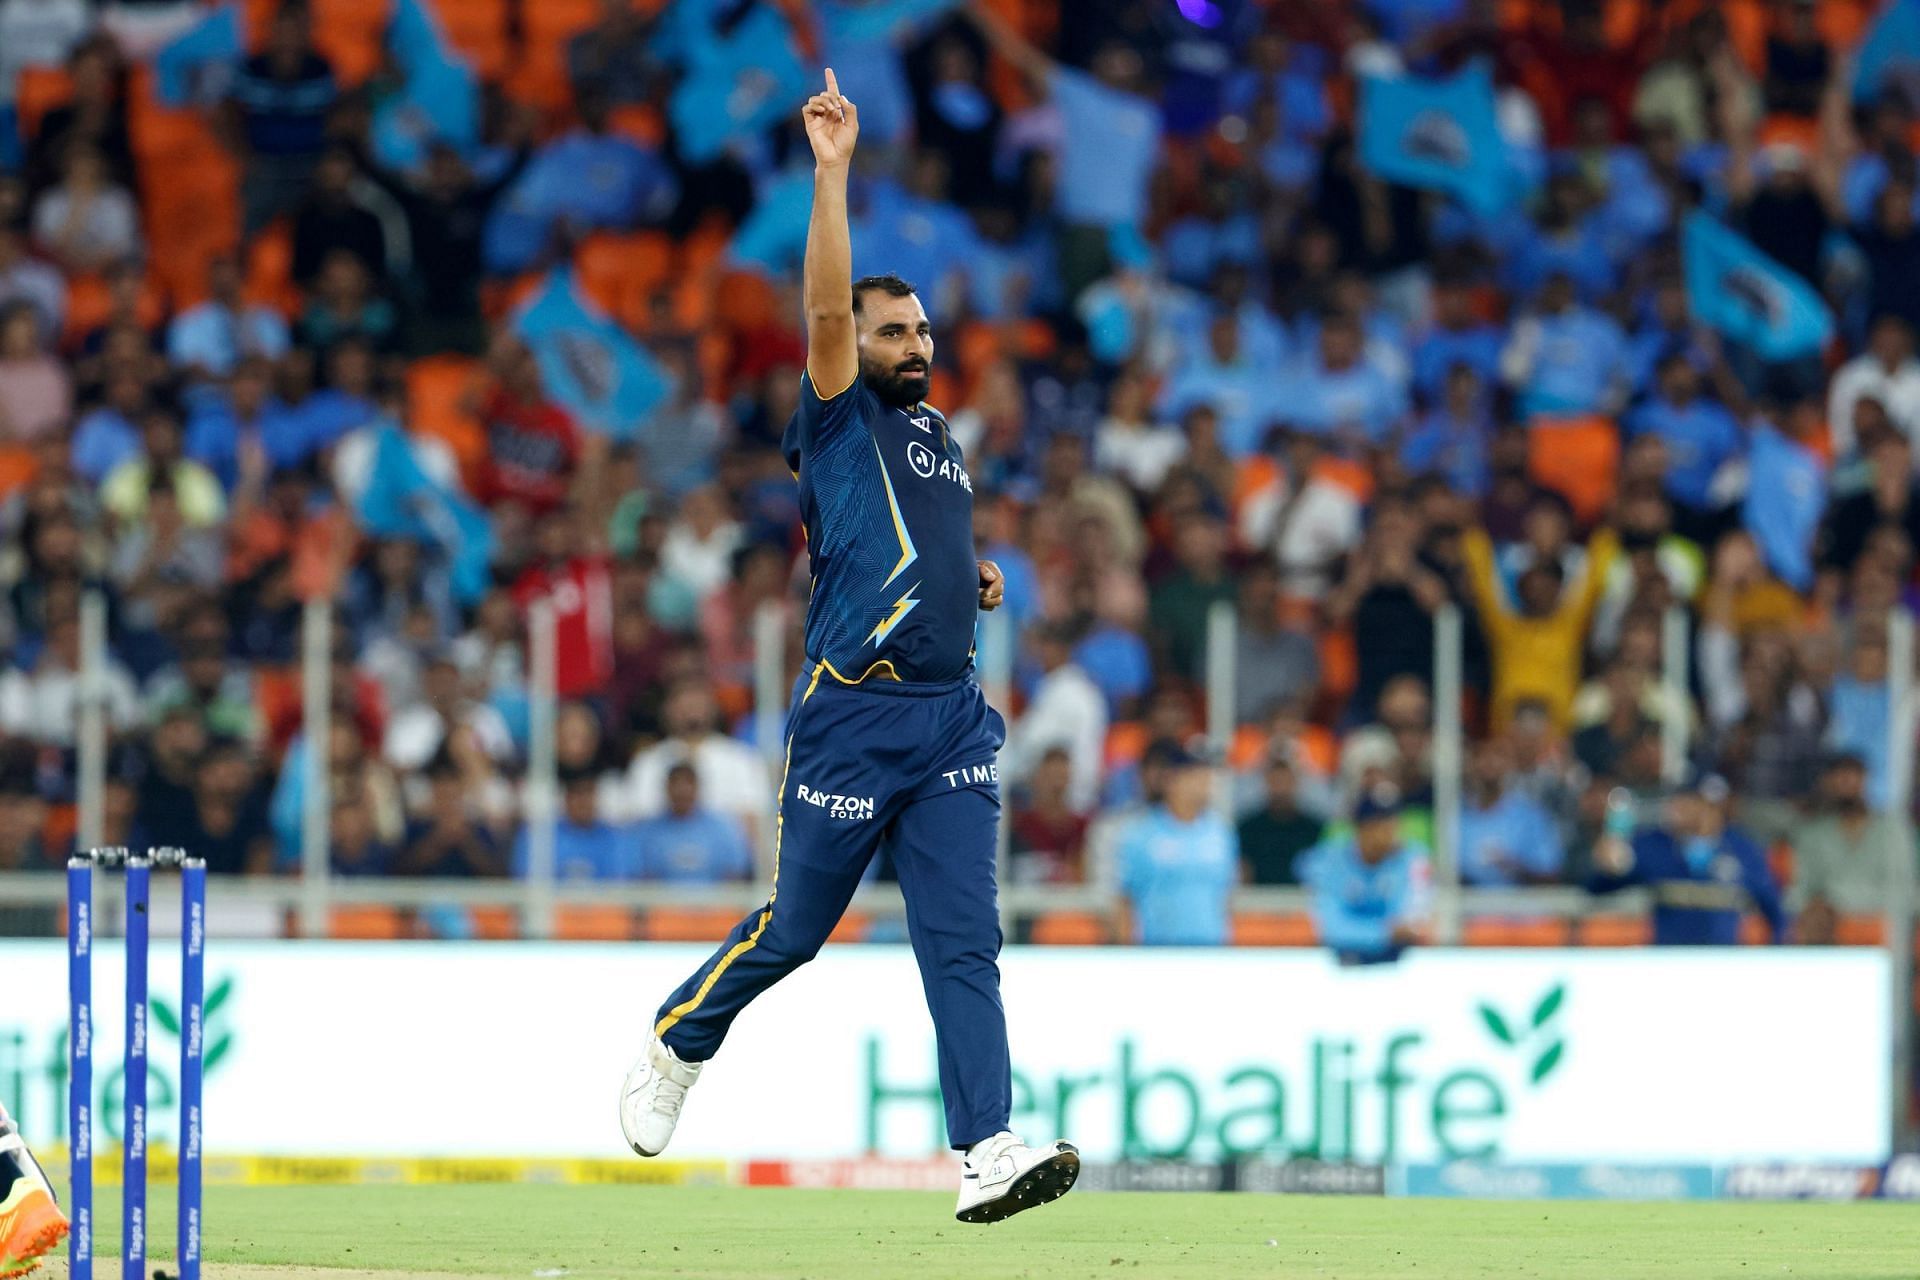 Mohammed Shami was brilliant against the Capitals (Image Courtesy: Twitter/IPL)